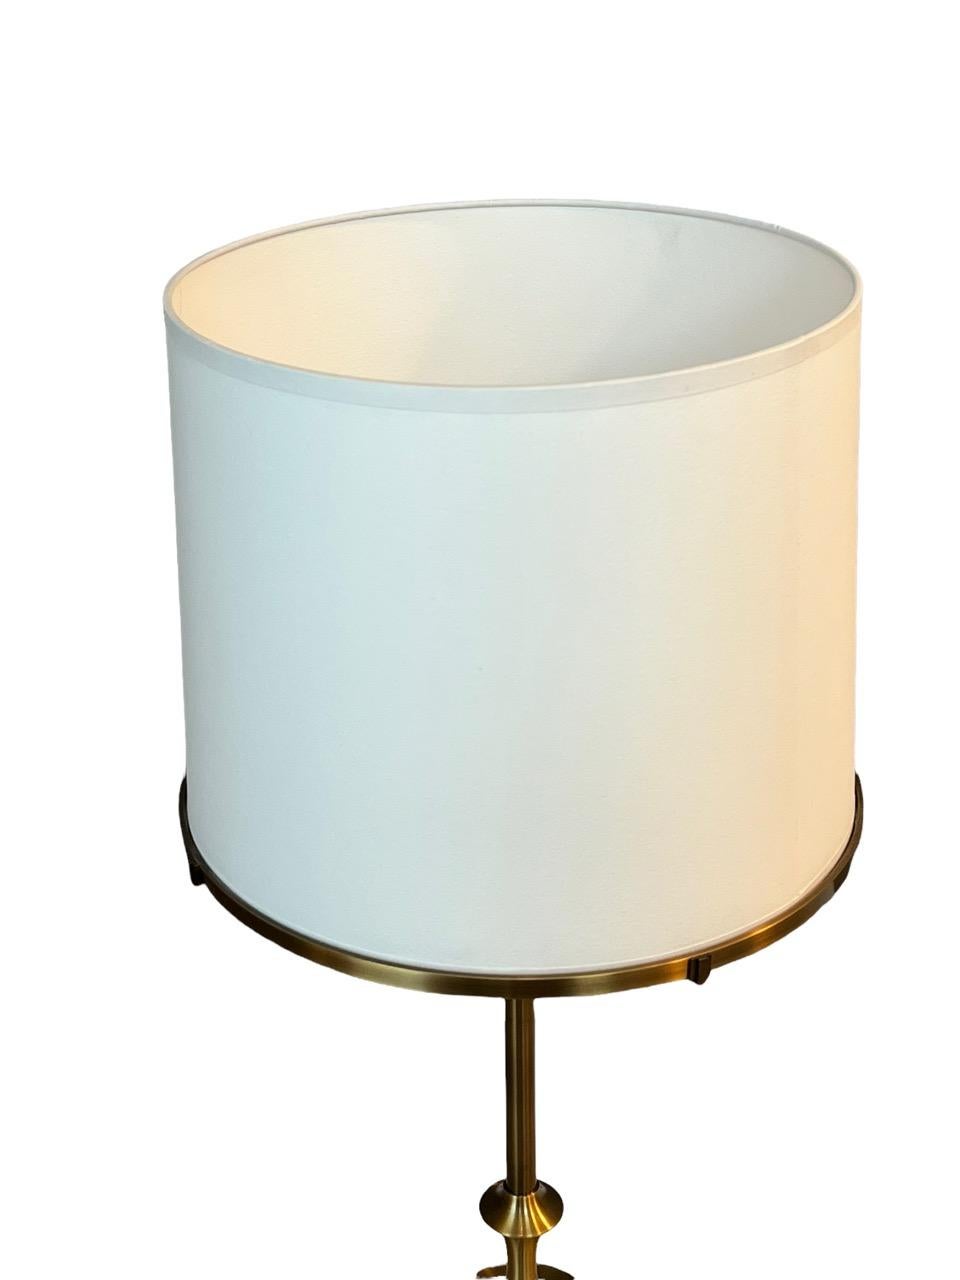 Contemporary Pair of Side Table Lamps, Solid Brass by Designer Solis Betancourt 9